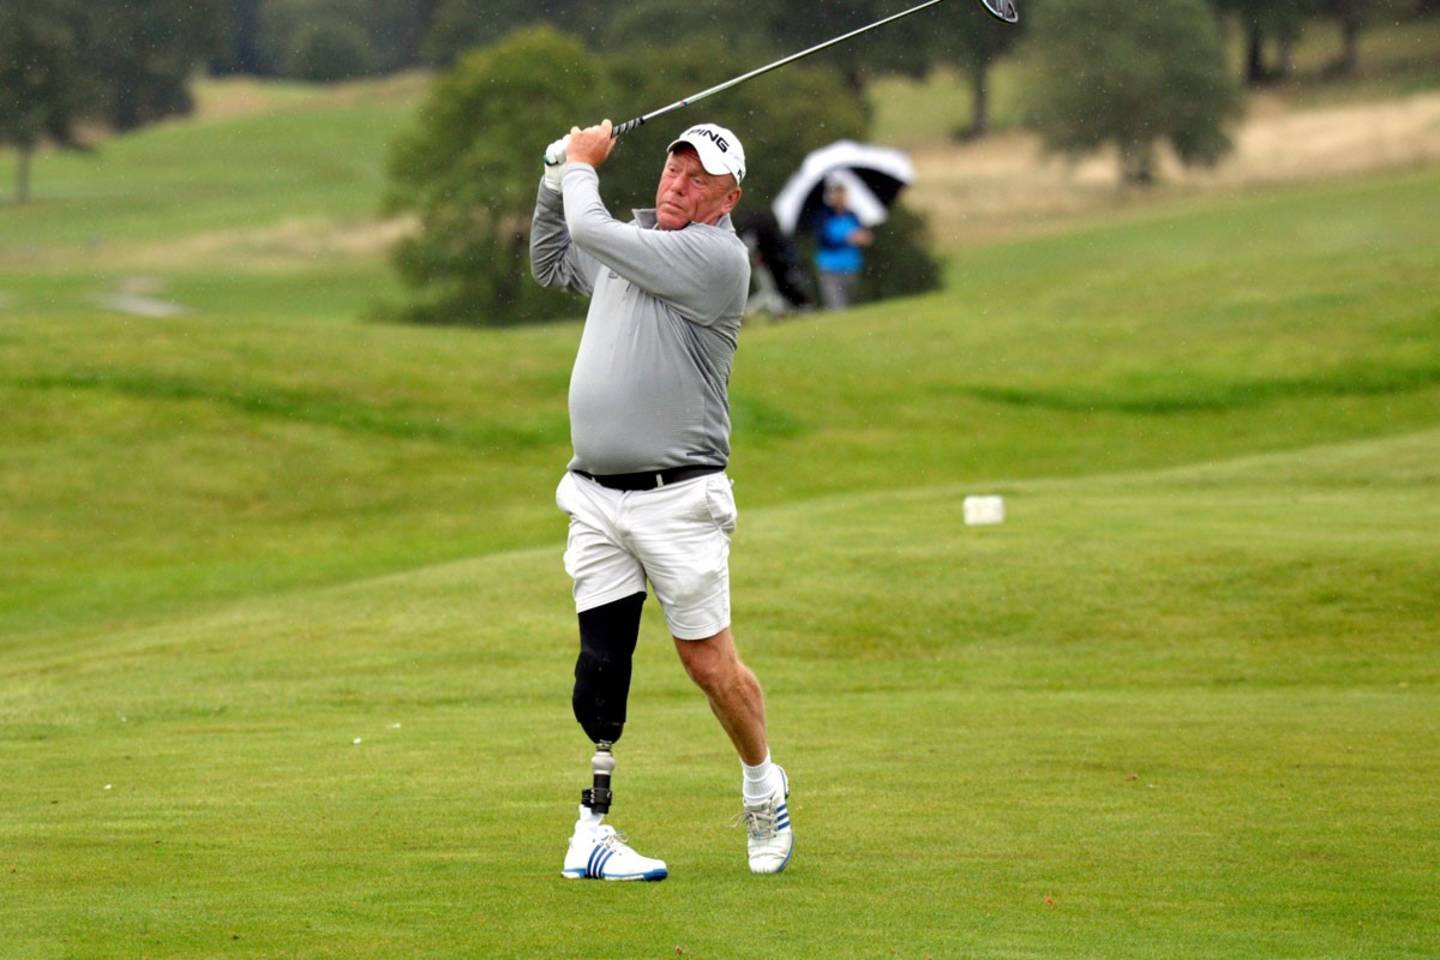 Amputee golfer Mick Horsley. Image copyright Leaderboard Photography